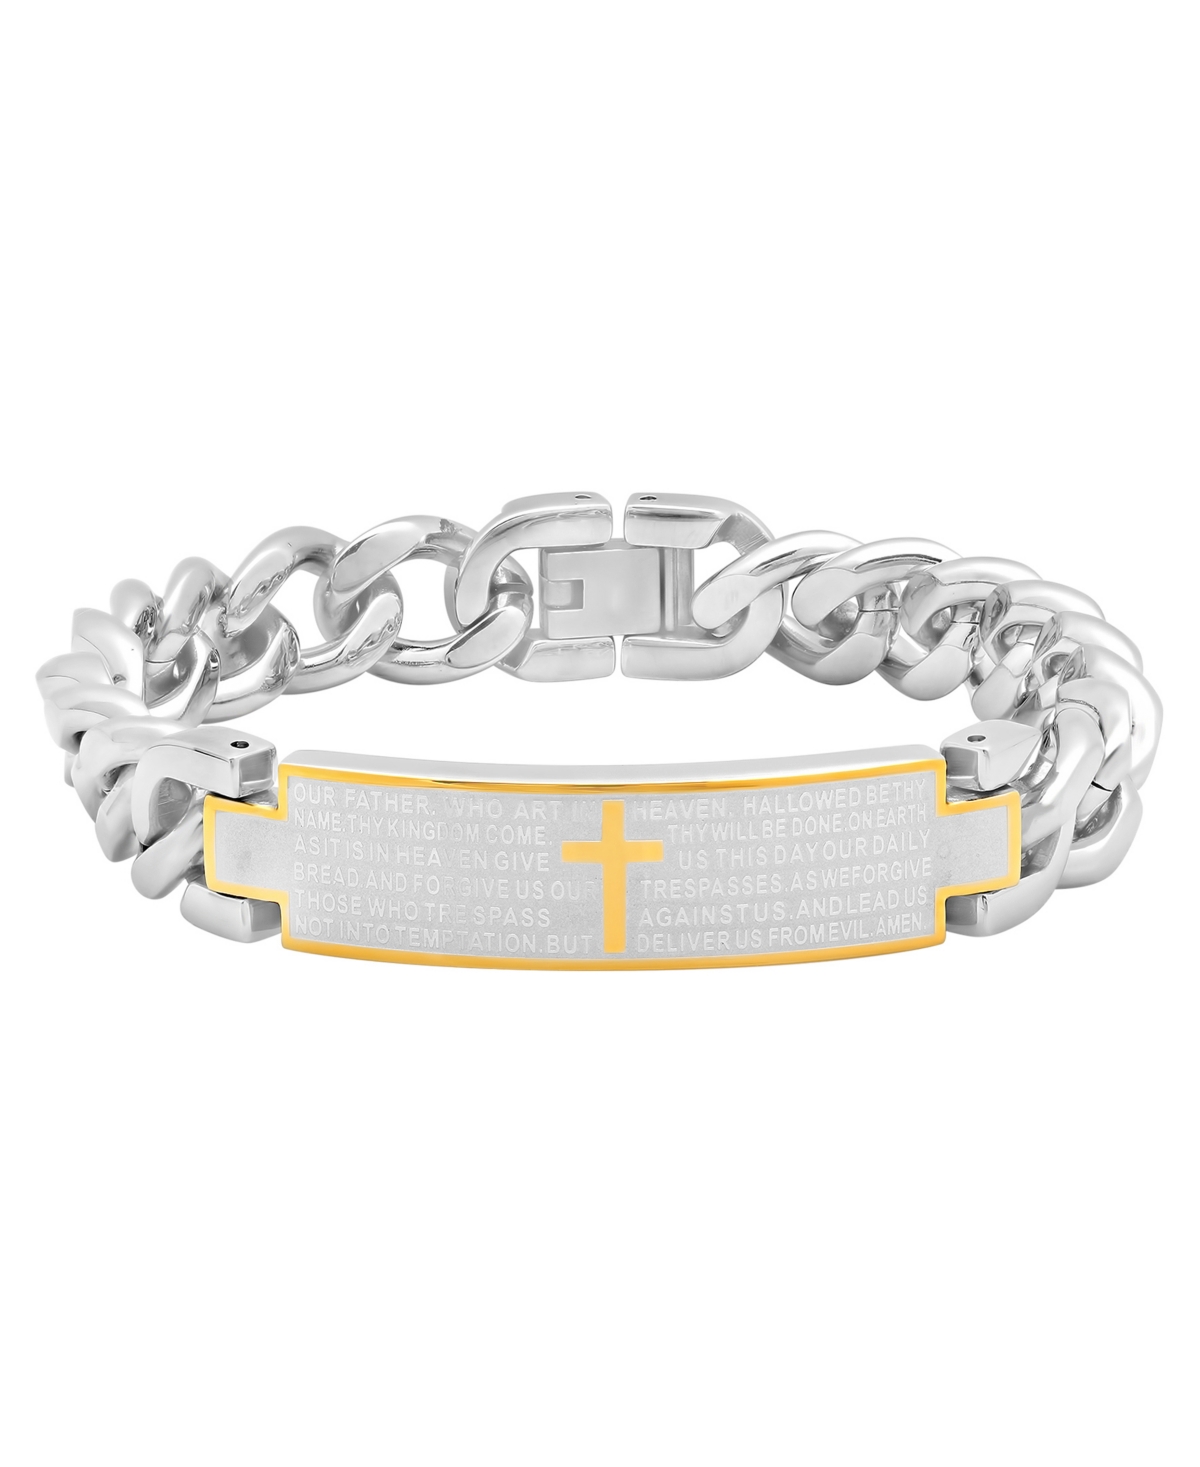 C & c Jewelry Macy's Men's The Lord's Prayer Id Link Bracelet in Two-Tone Stainless Steel